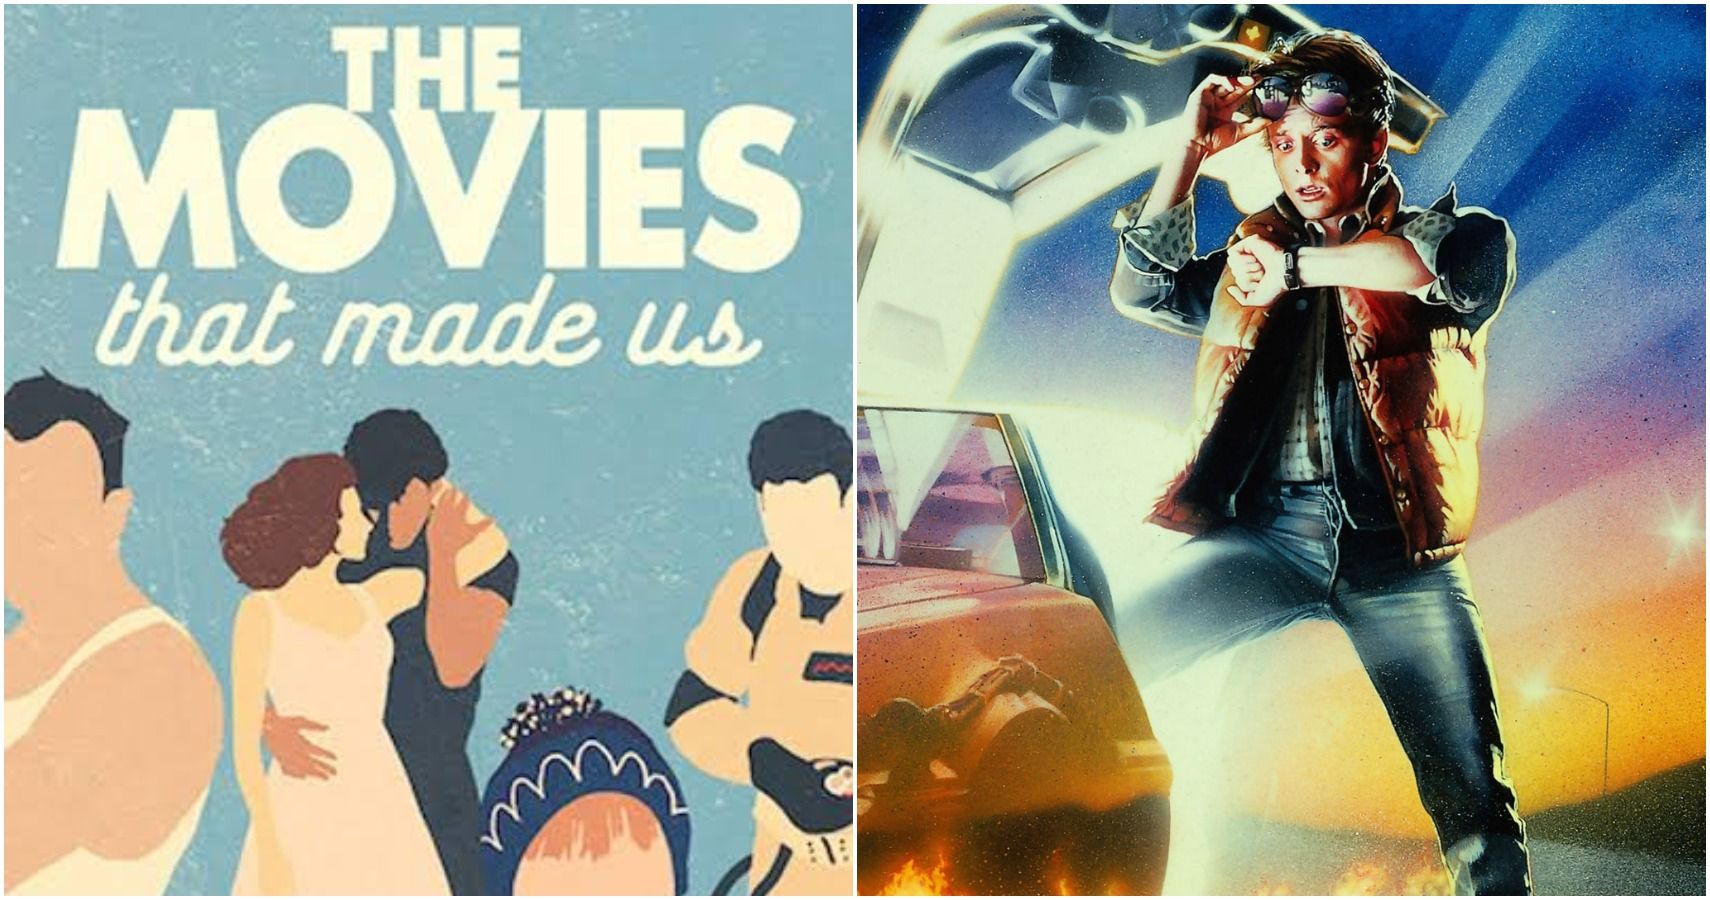 10 Movies That Should Be Featured In Netflix’s "The Movies That Made Us"